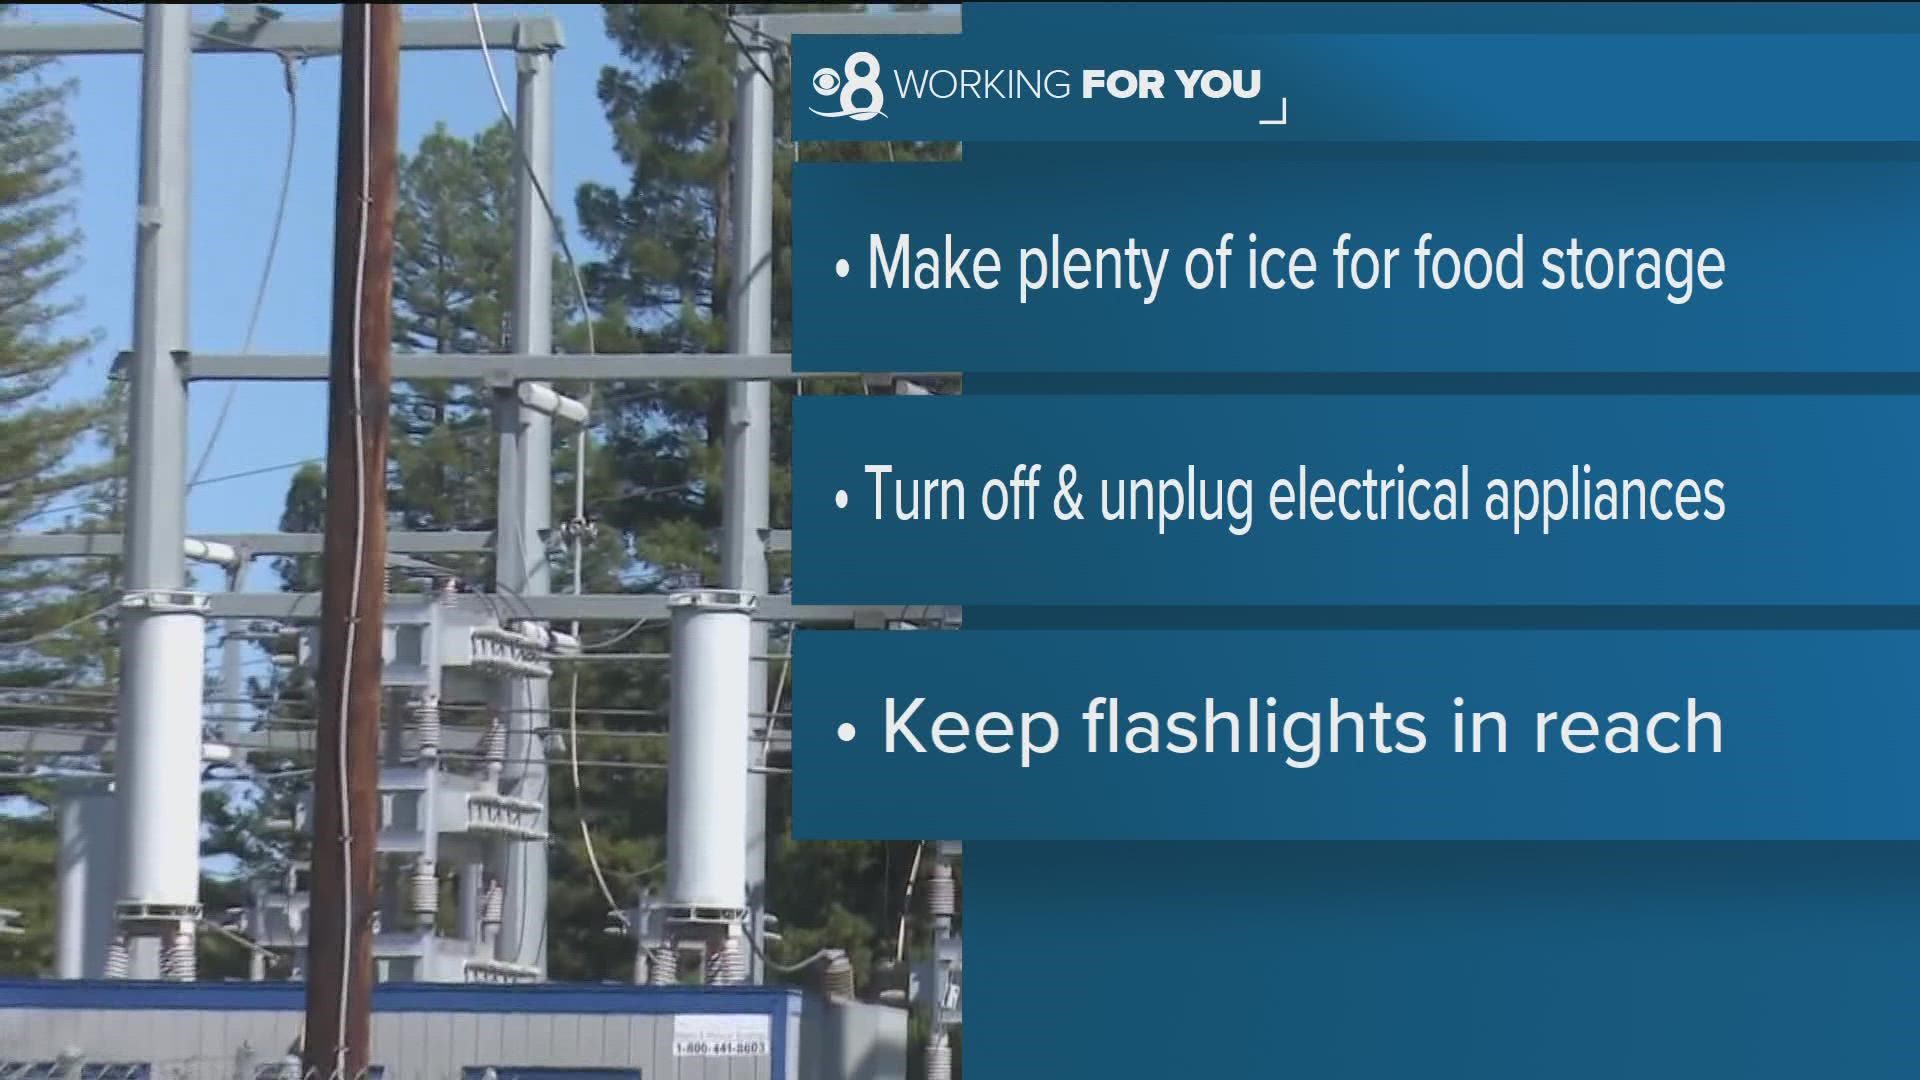 Ready San Diego has checklists of what you should do before, during and after a power outage.